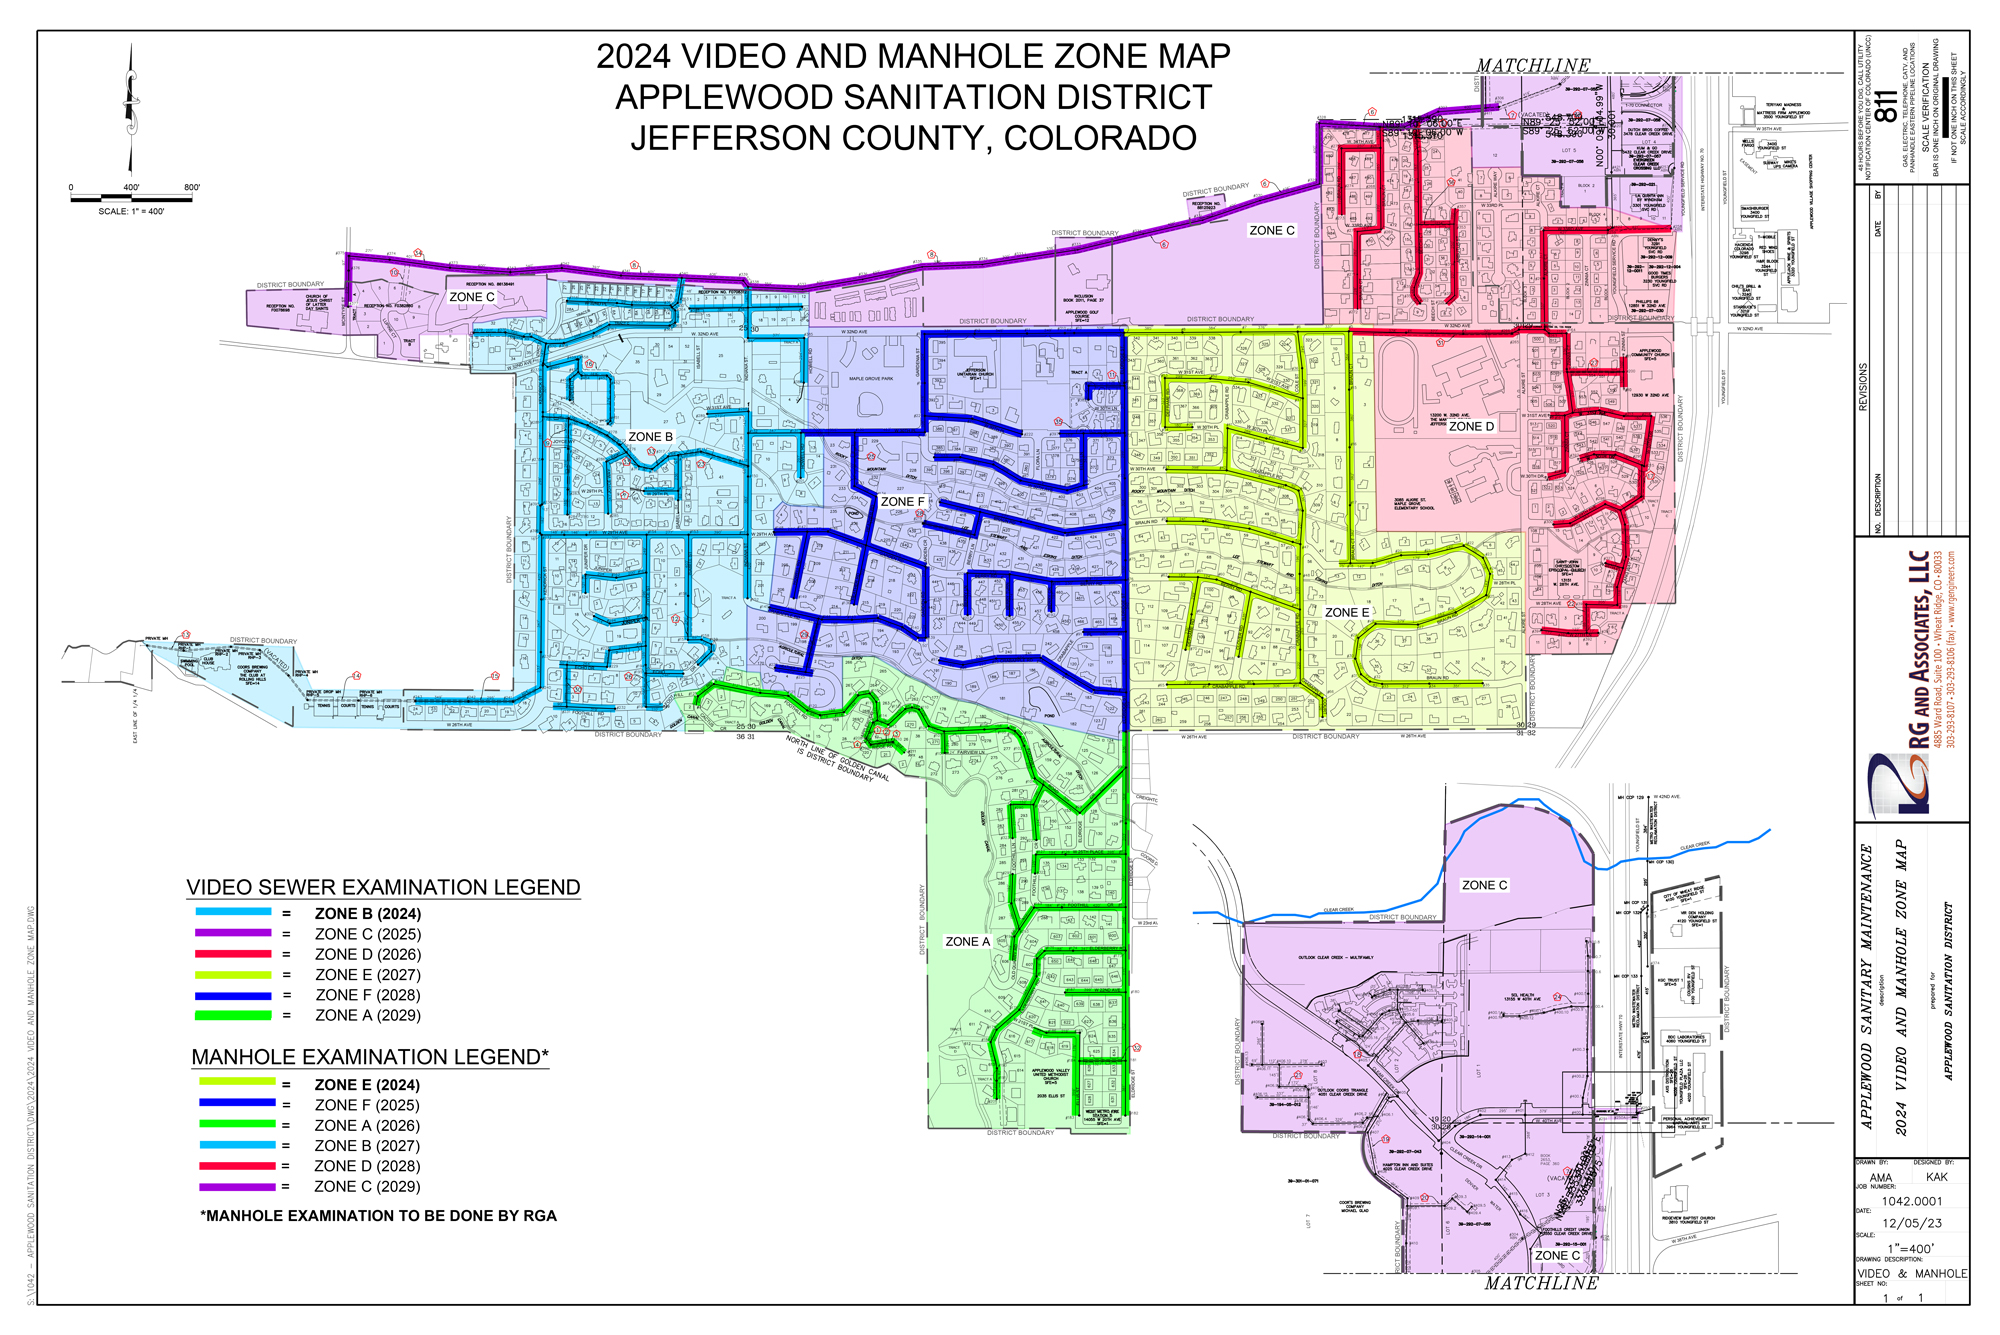 2024 Video and Manhole Zone Map Overall